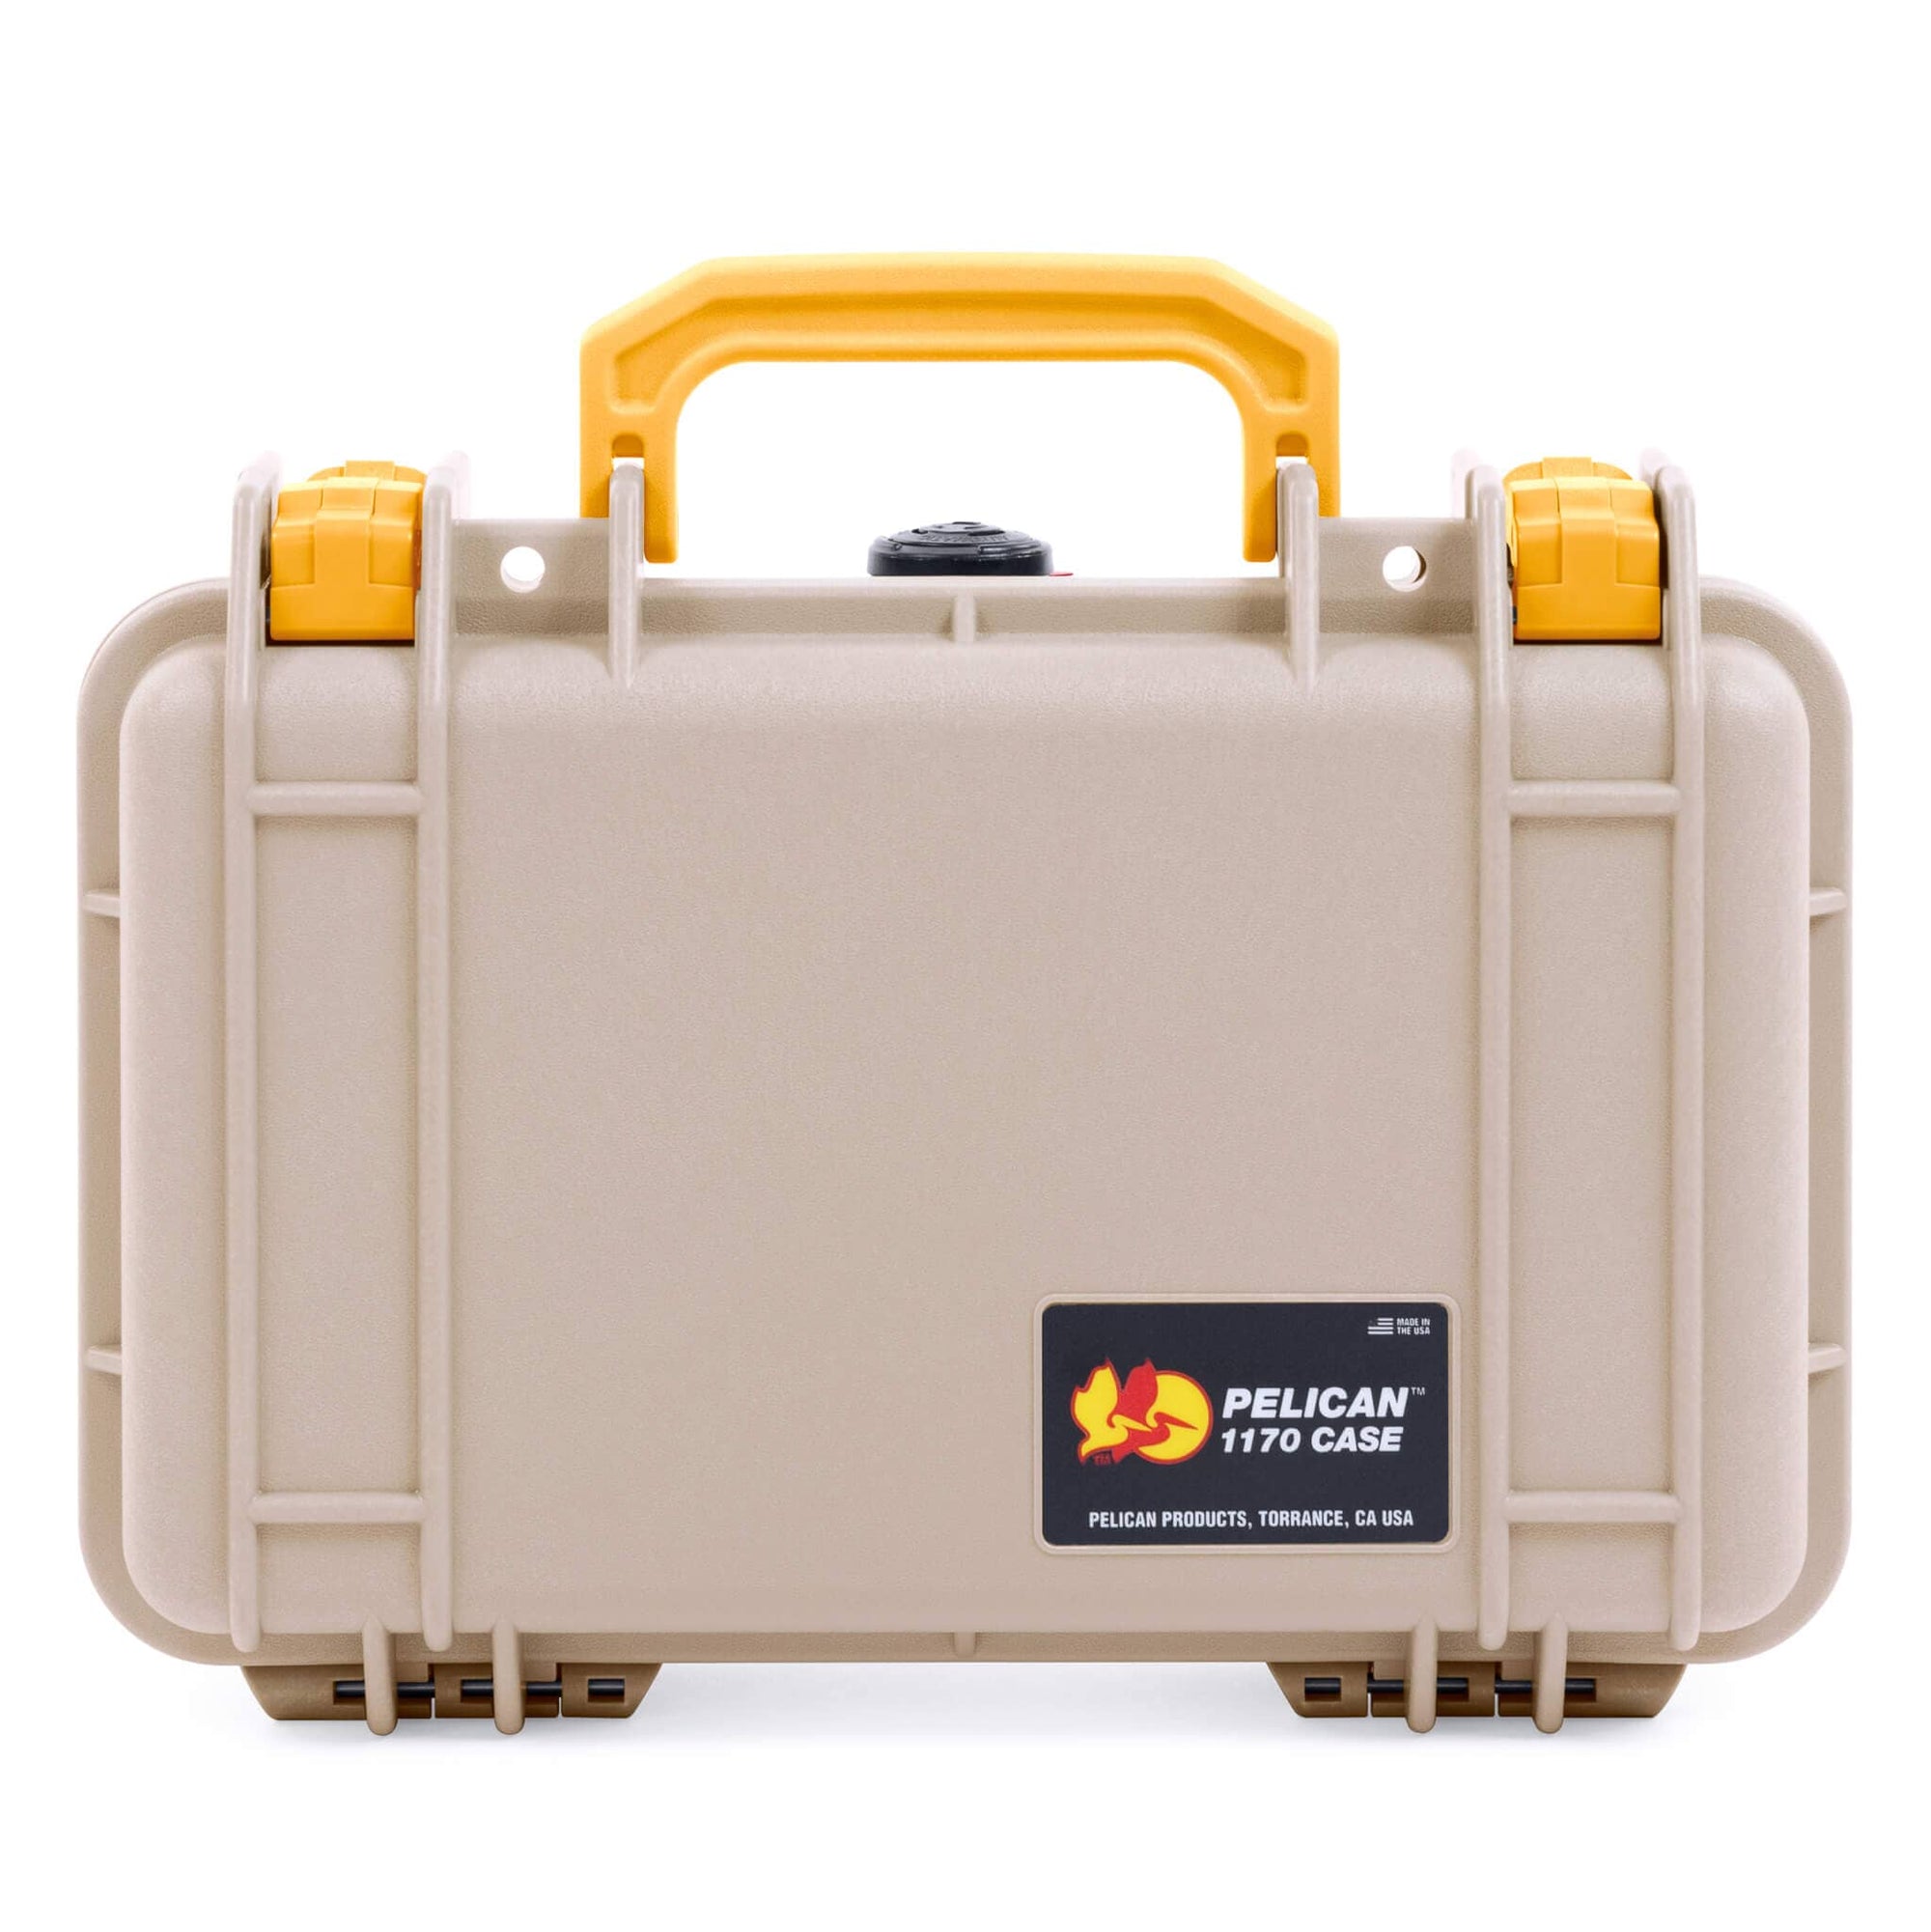 Pelican 1170 Case, Desert Tan with Yellow Handle & Latches ColorCase 